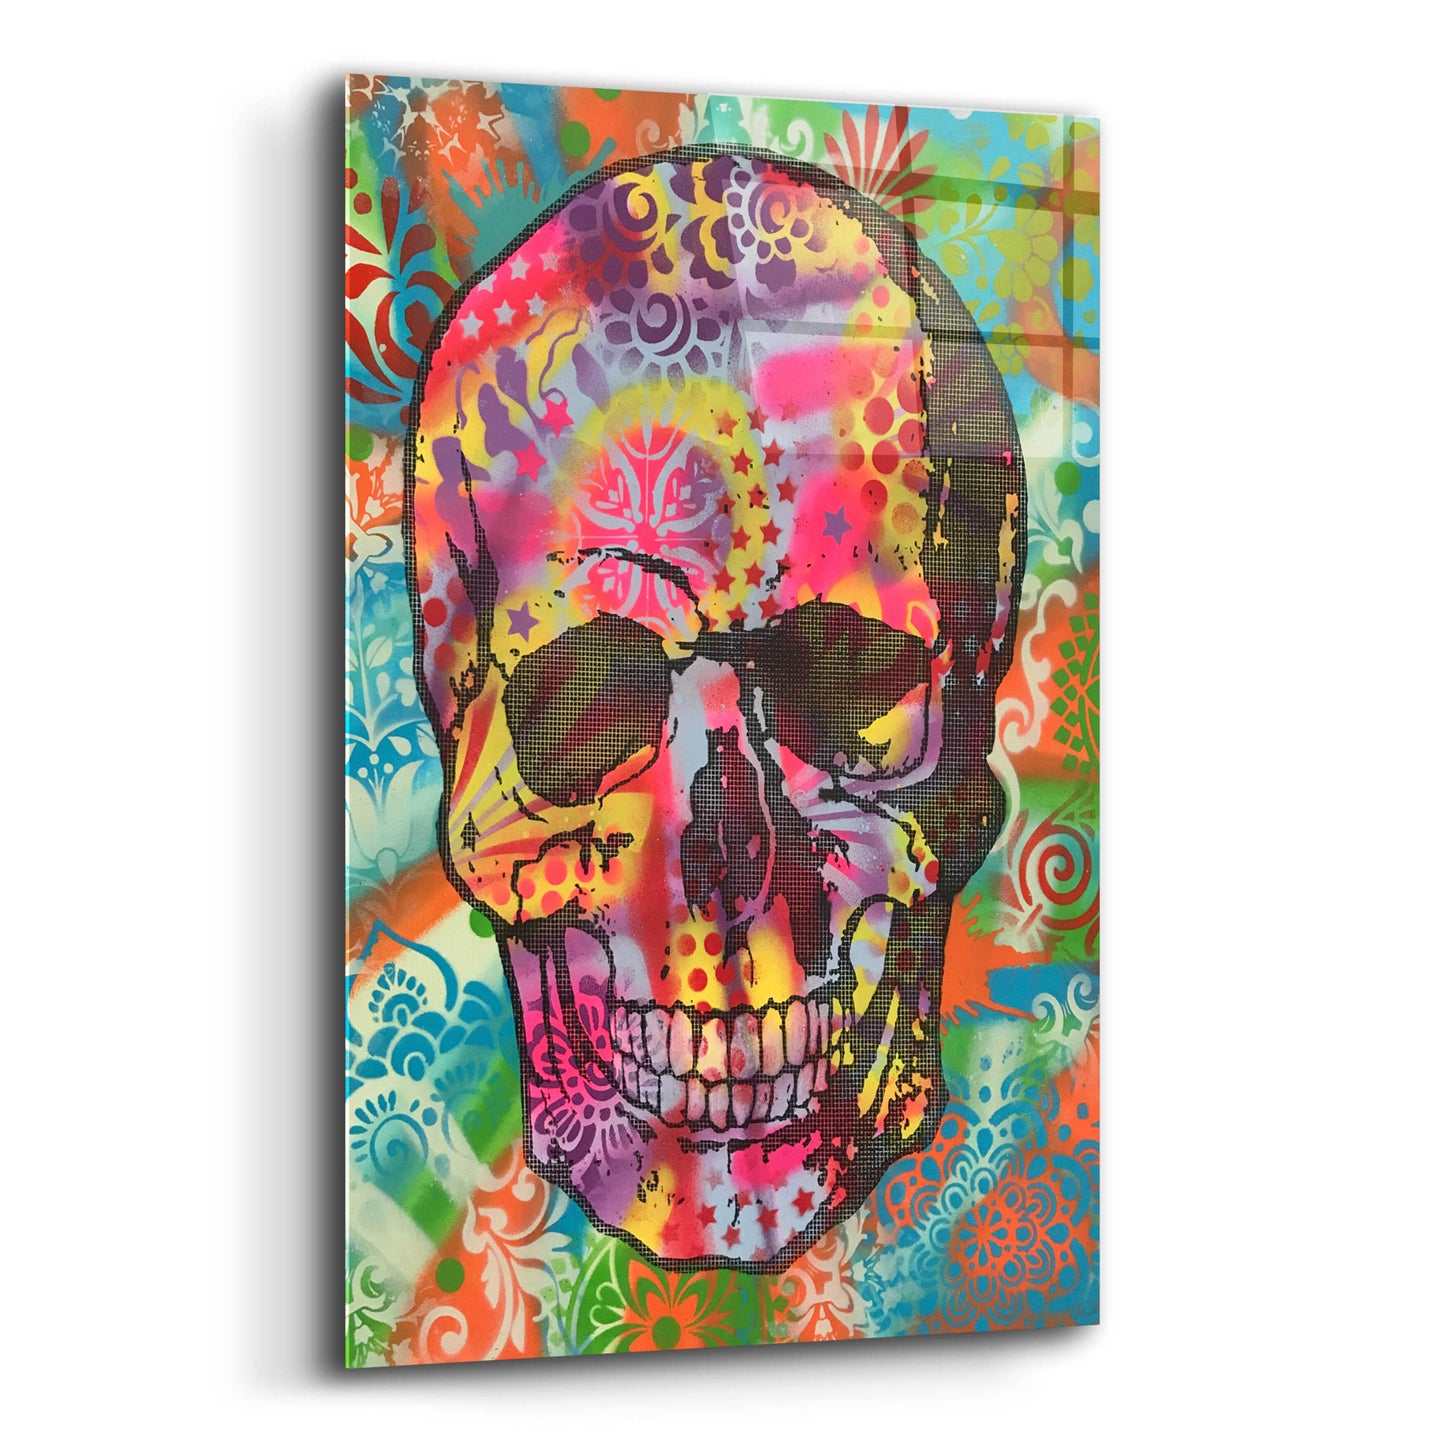 Epic Art 'Skull 1UP' by Dean Russo, Acrylic Glass Wall Art,12x16